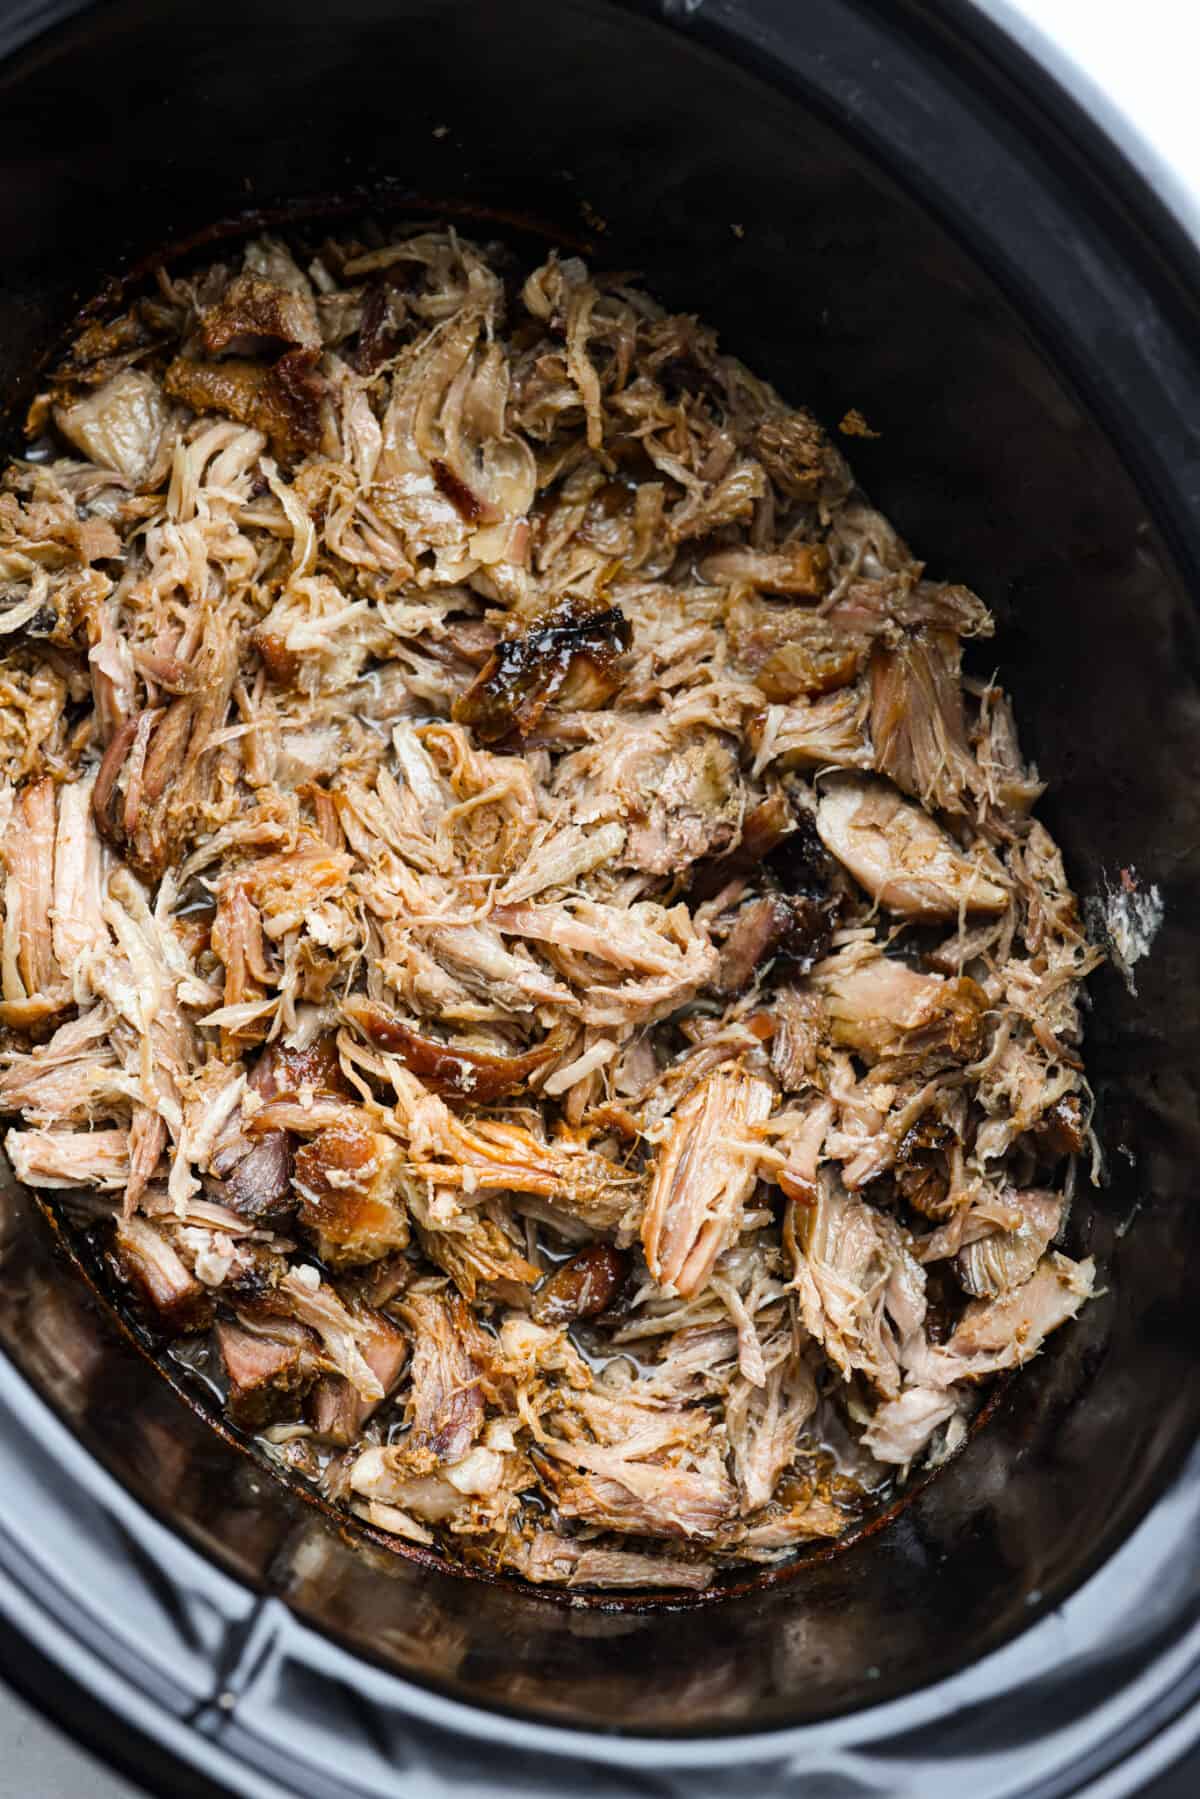 Top view of the shredded kalua pork in the slow cooker.